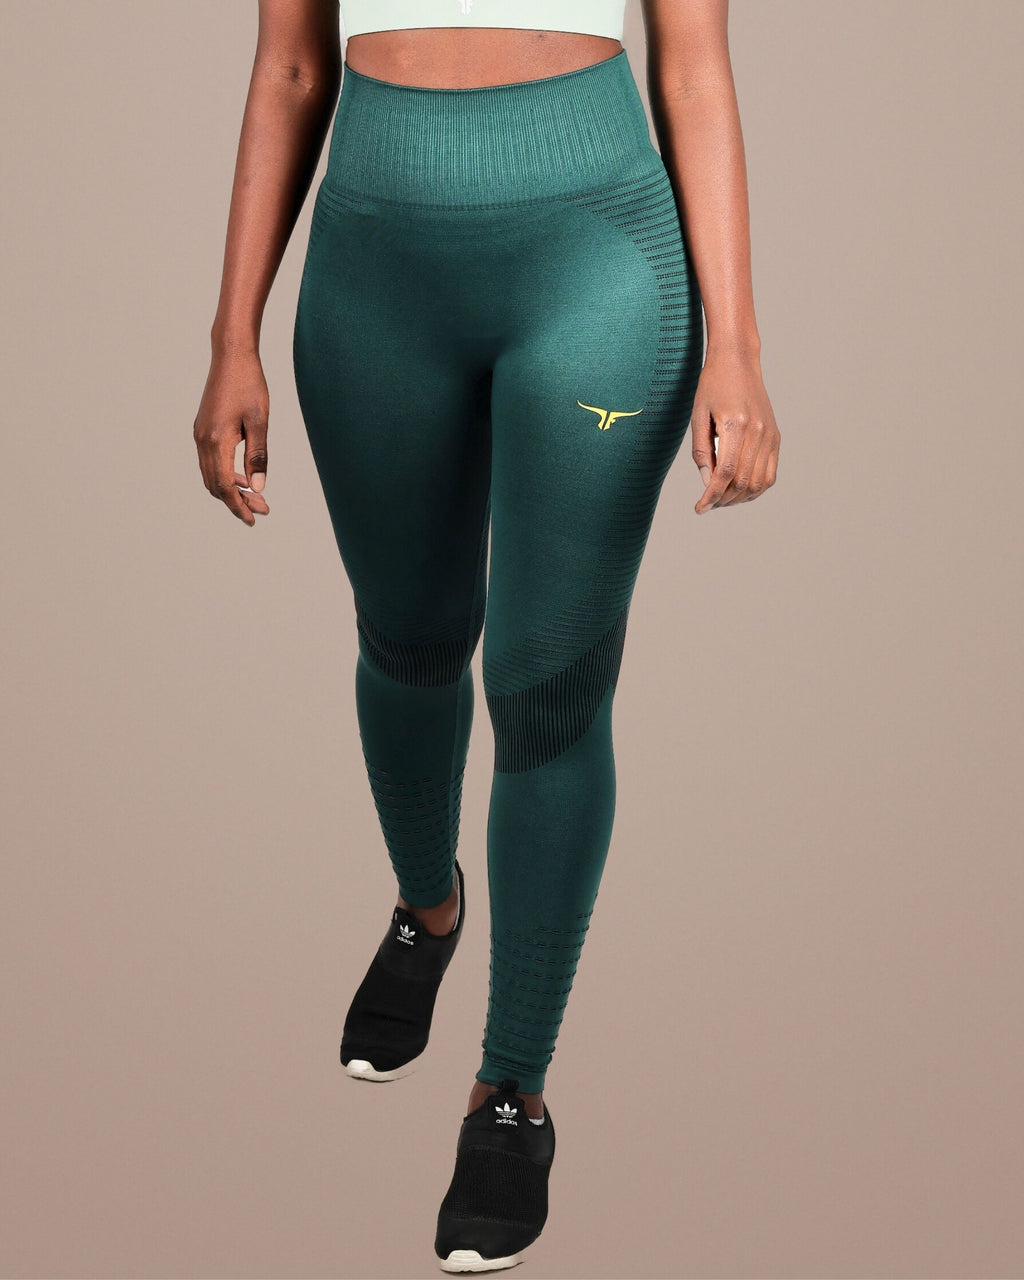 THUGFIT FunkyHues Performance-Stride Fitness Leggings - Green